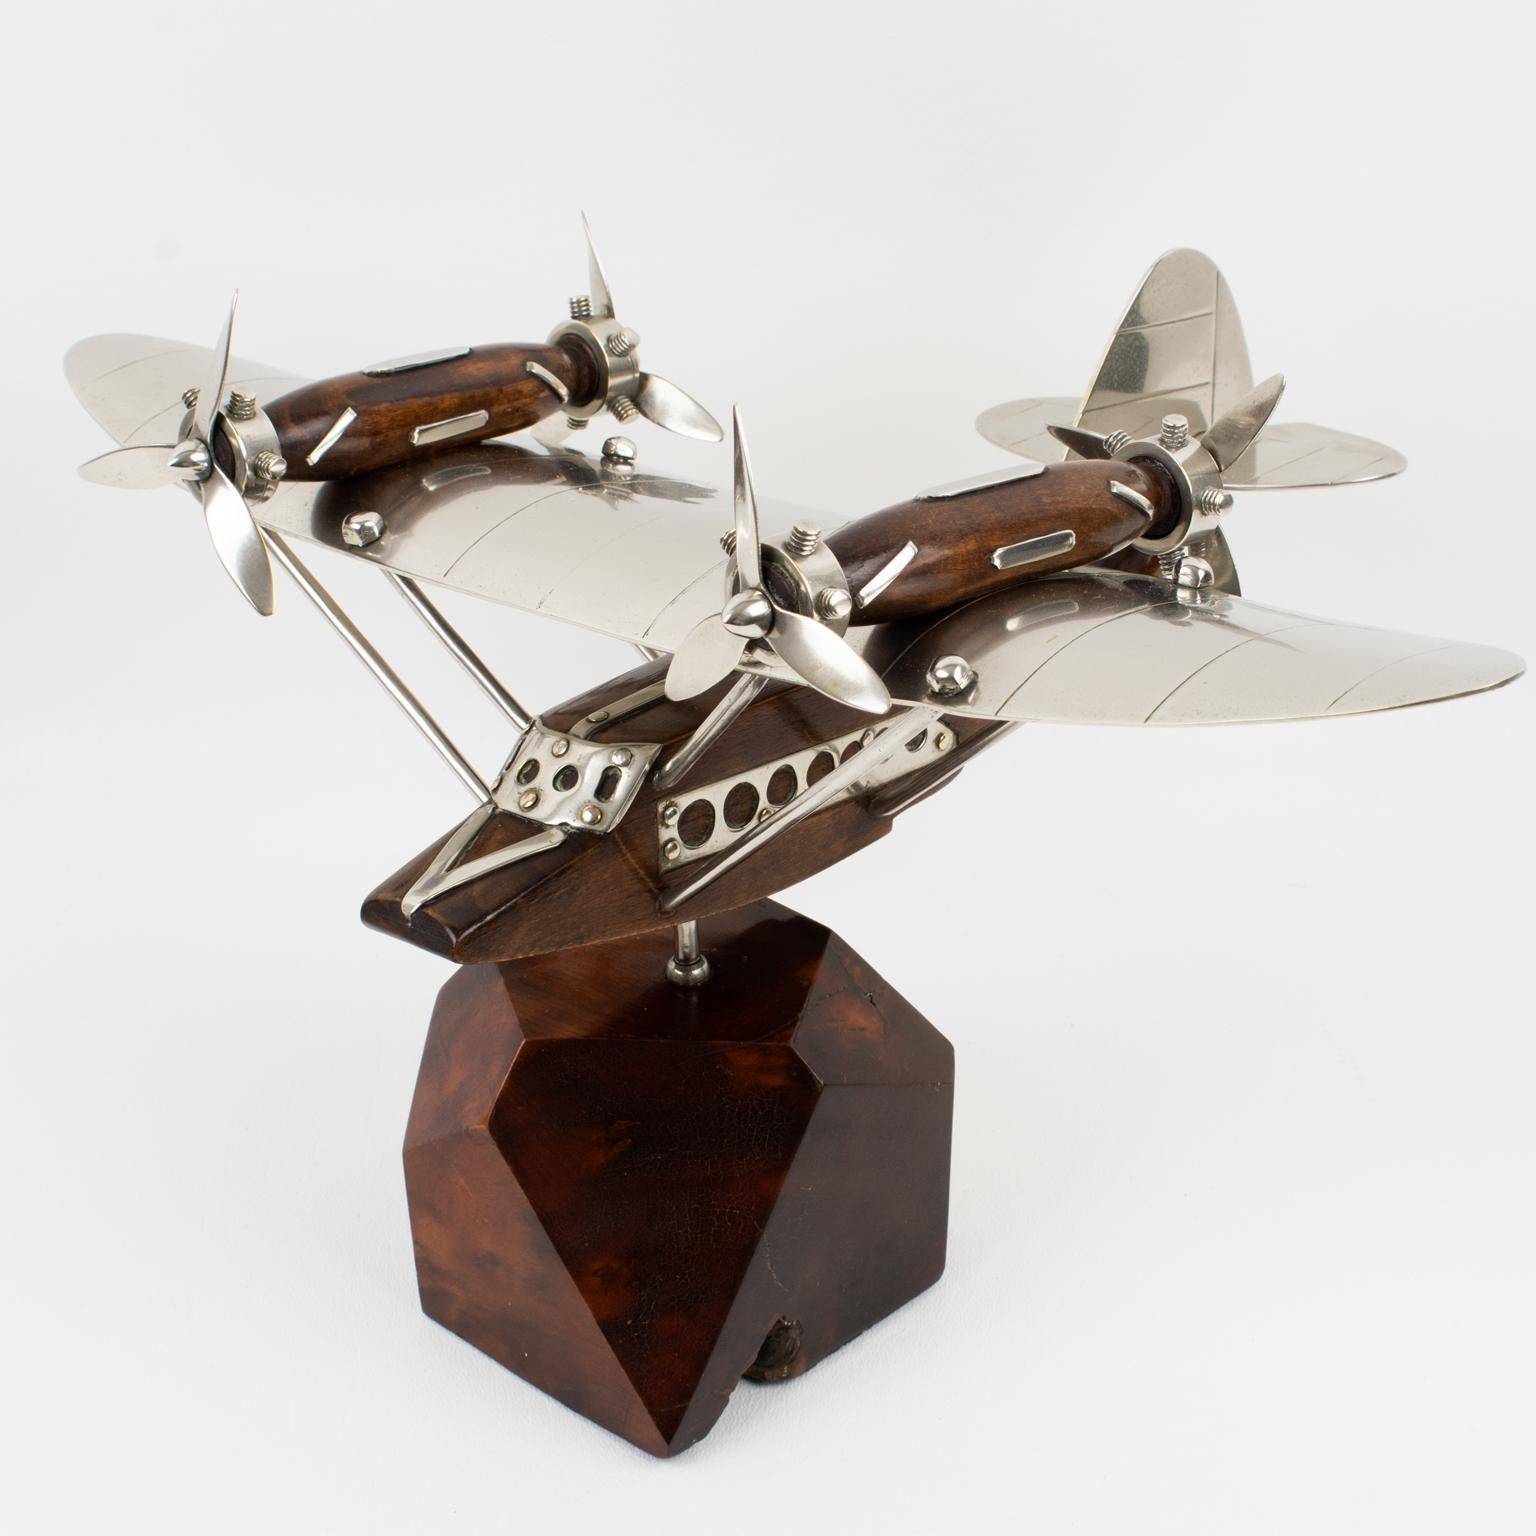 Art Deco Wood and Chrome Airplane SeaPlane Aviation Model, France 1940s For Sale 1